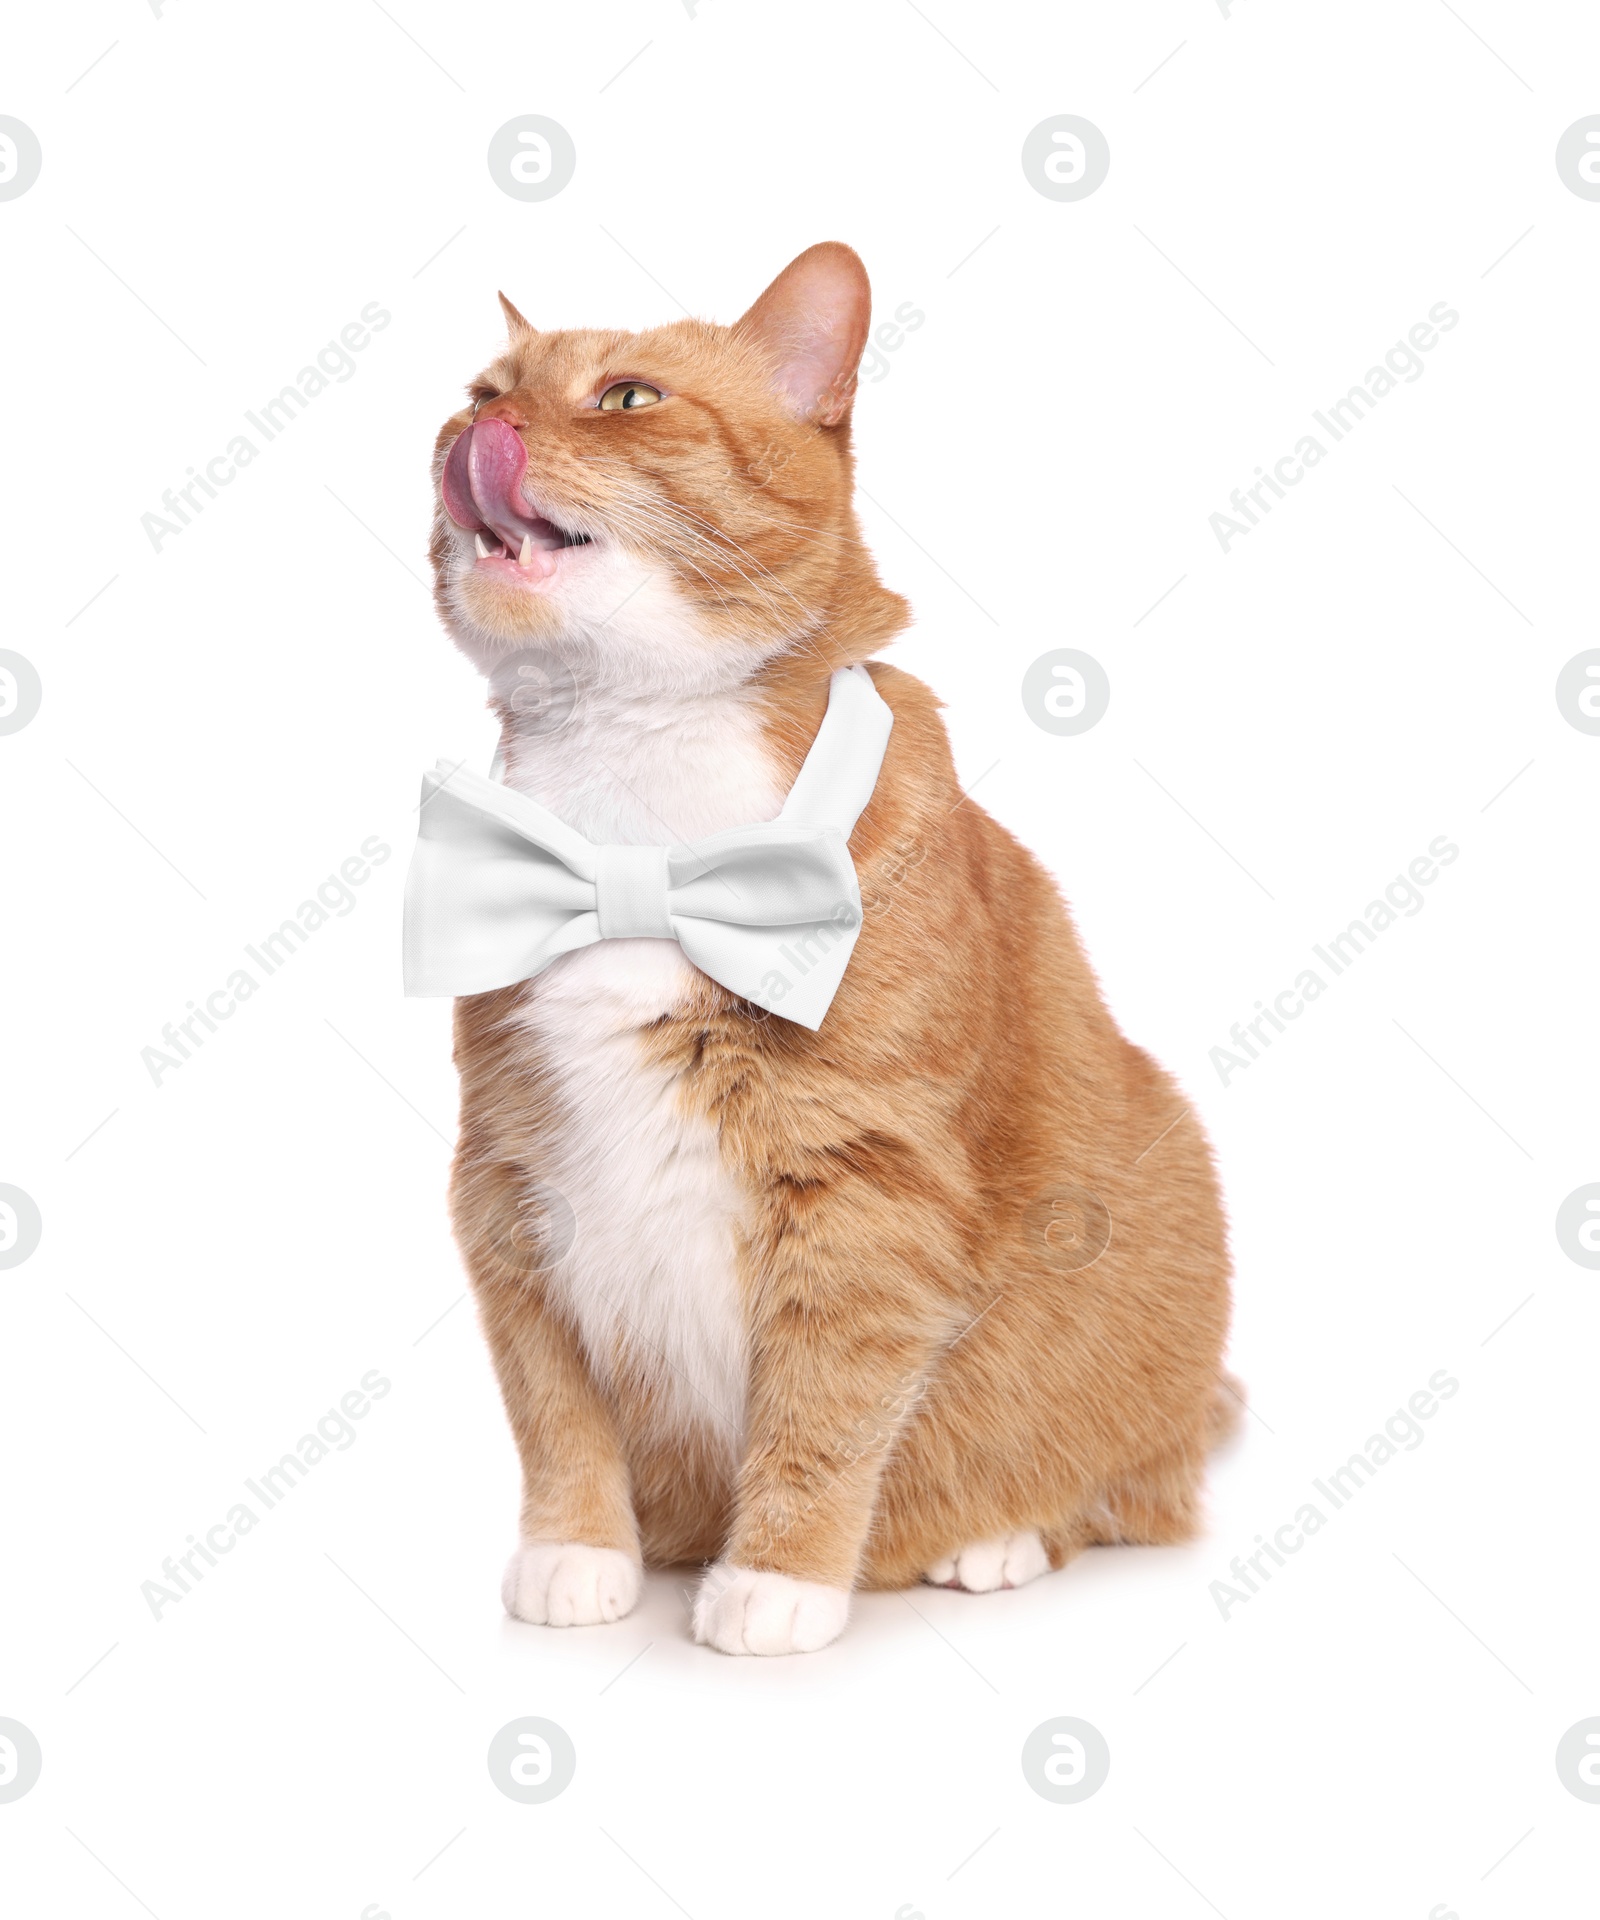 Photo of Cute cat with bow tie licking itself on white background